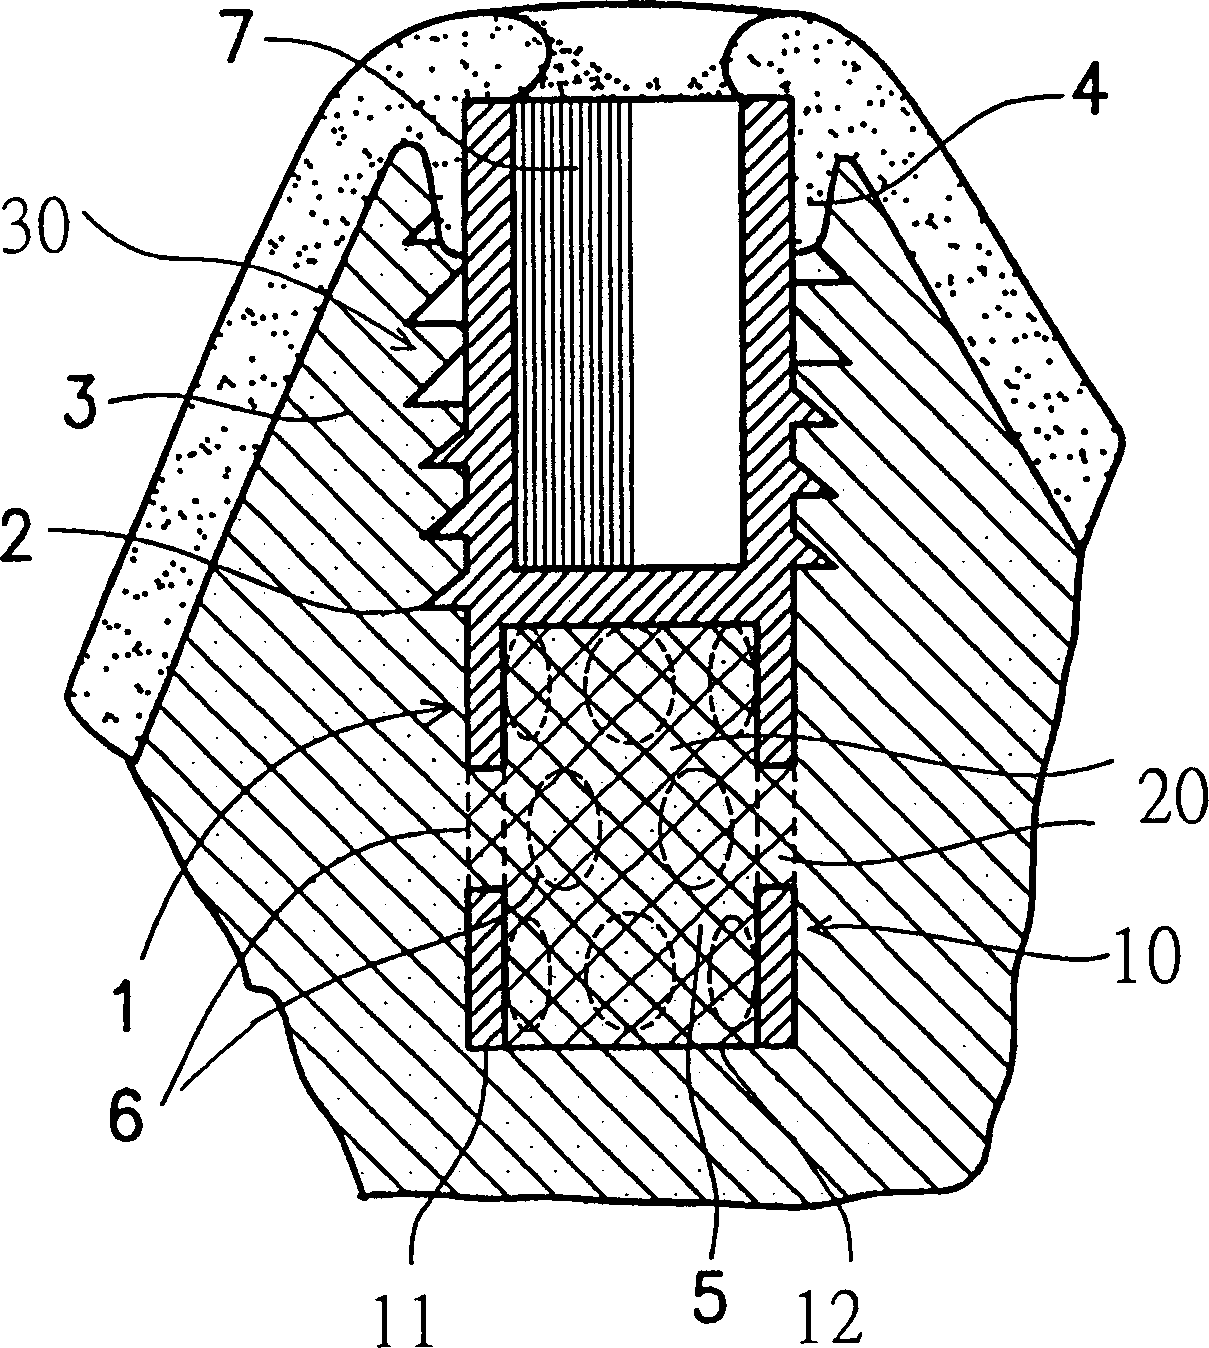 Dental implanting object containing calcium phosphate cementing agent